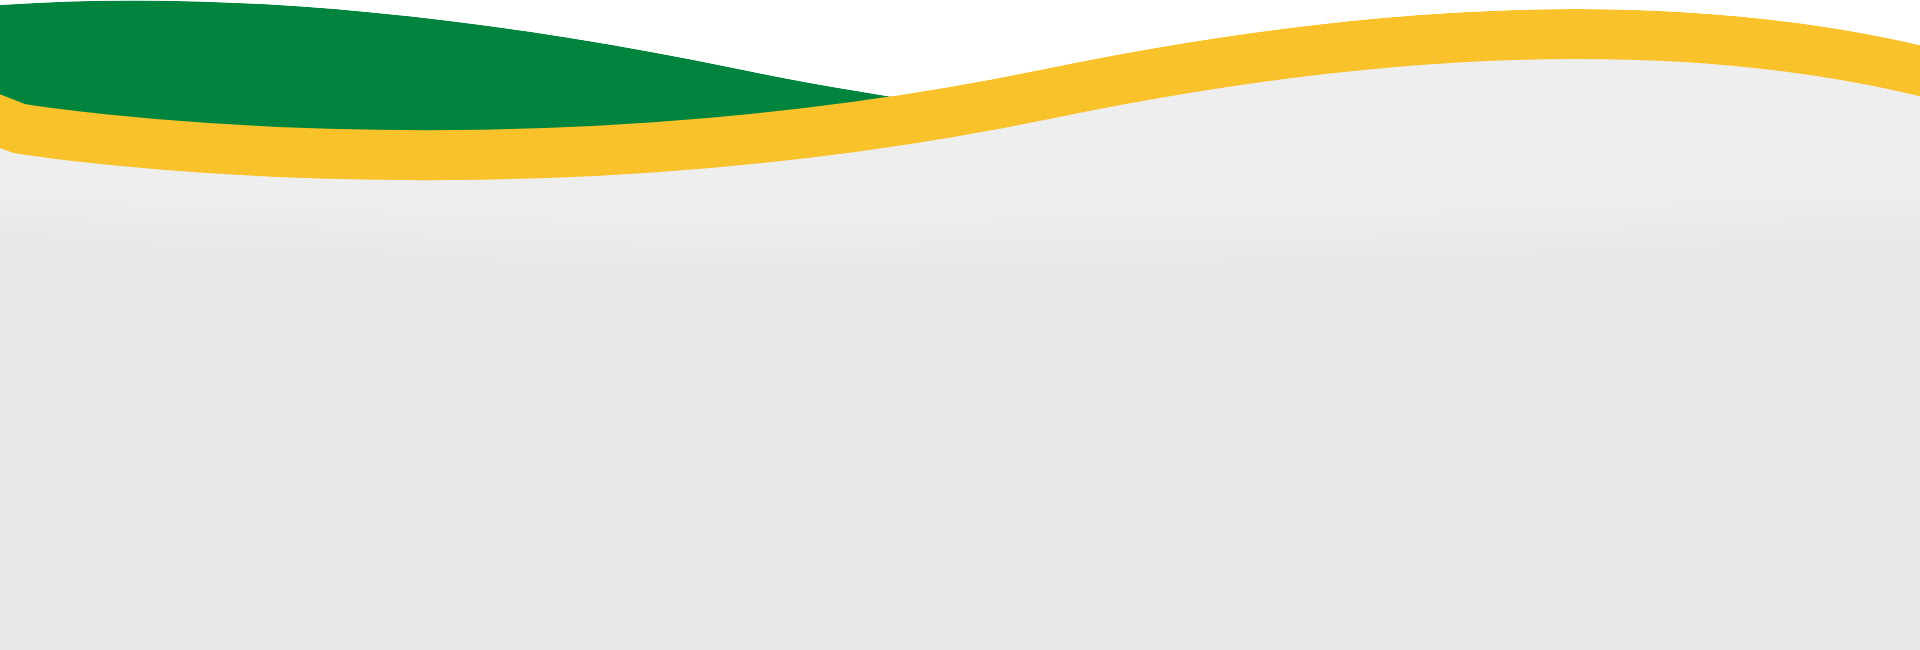 background image with yellow and green lines